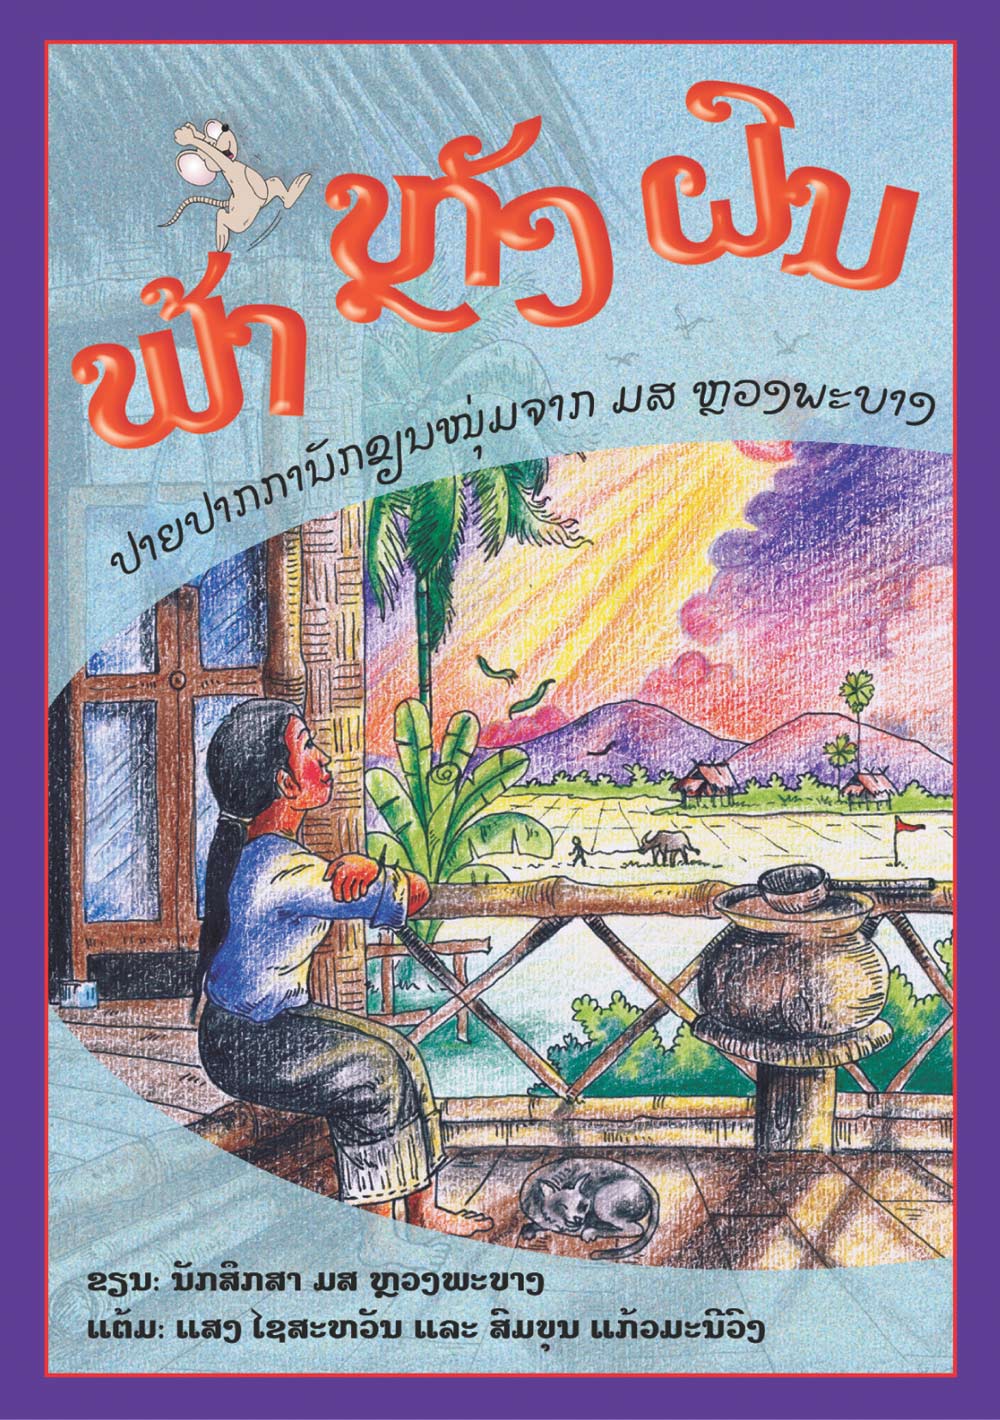 Sky After Rain large book cover, published in Lao language